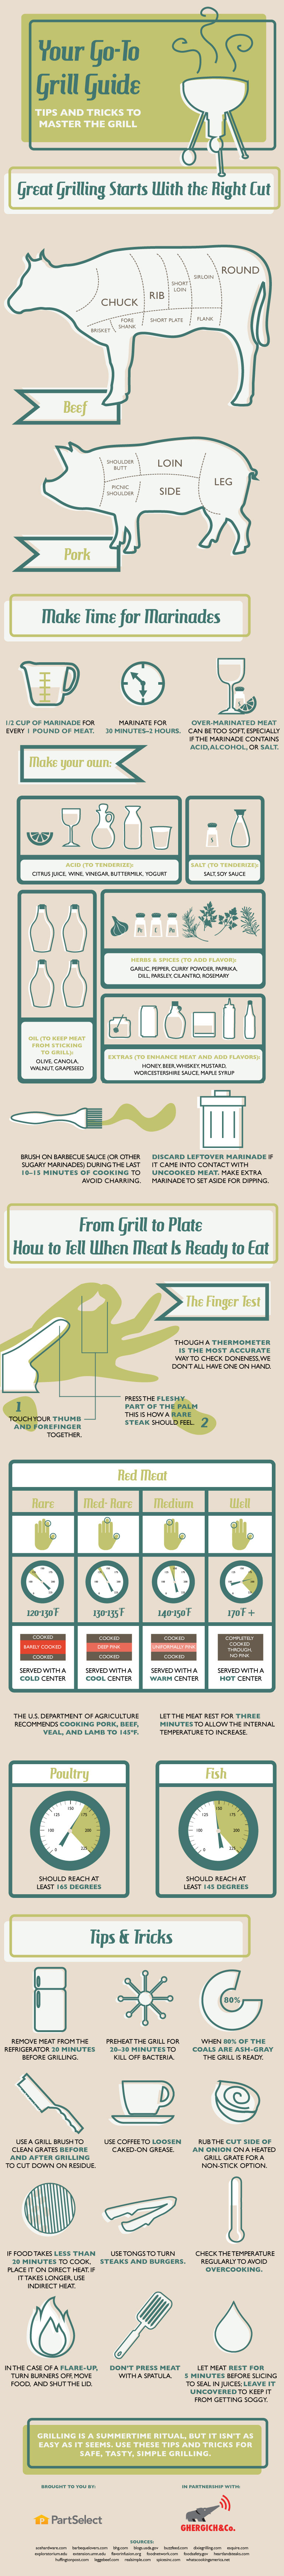 Your Go-To Grill Guide - Tips and Tricks to Master the Grill